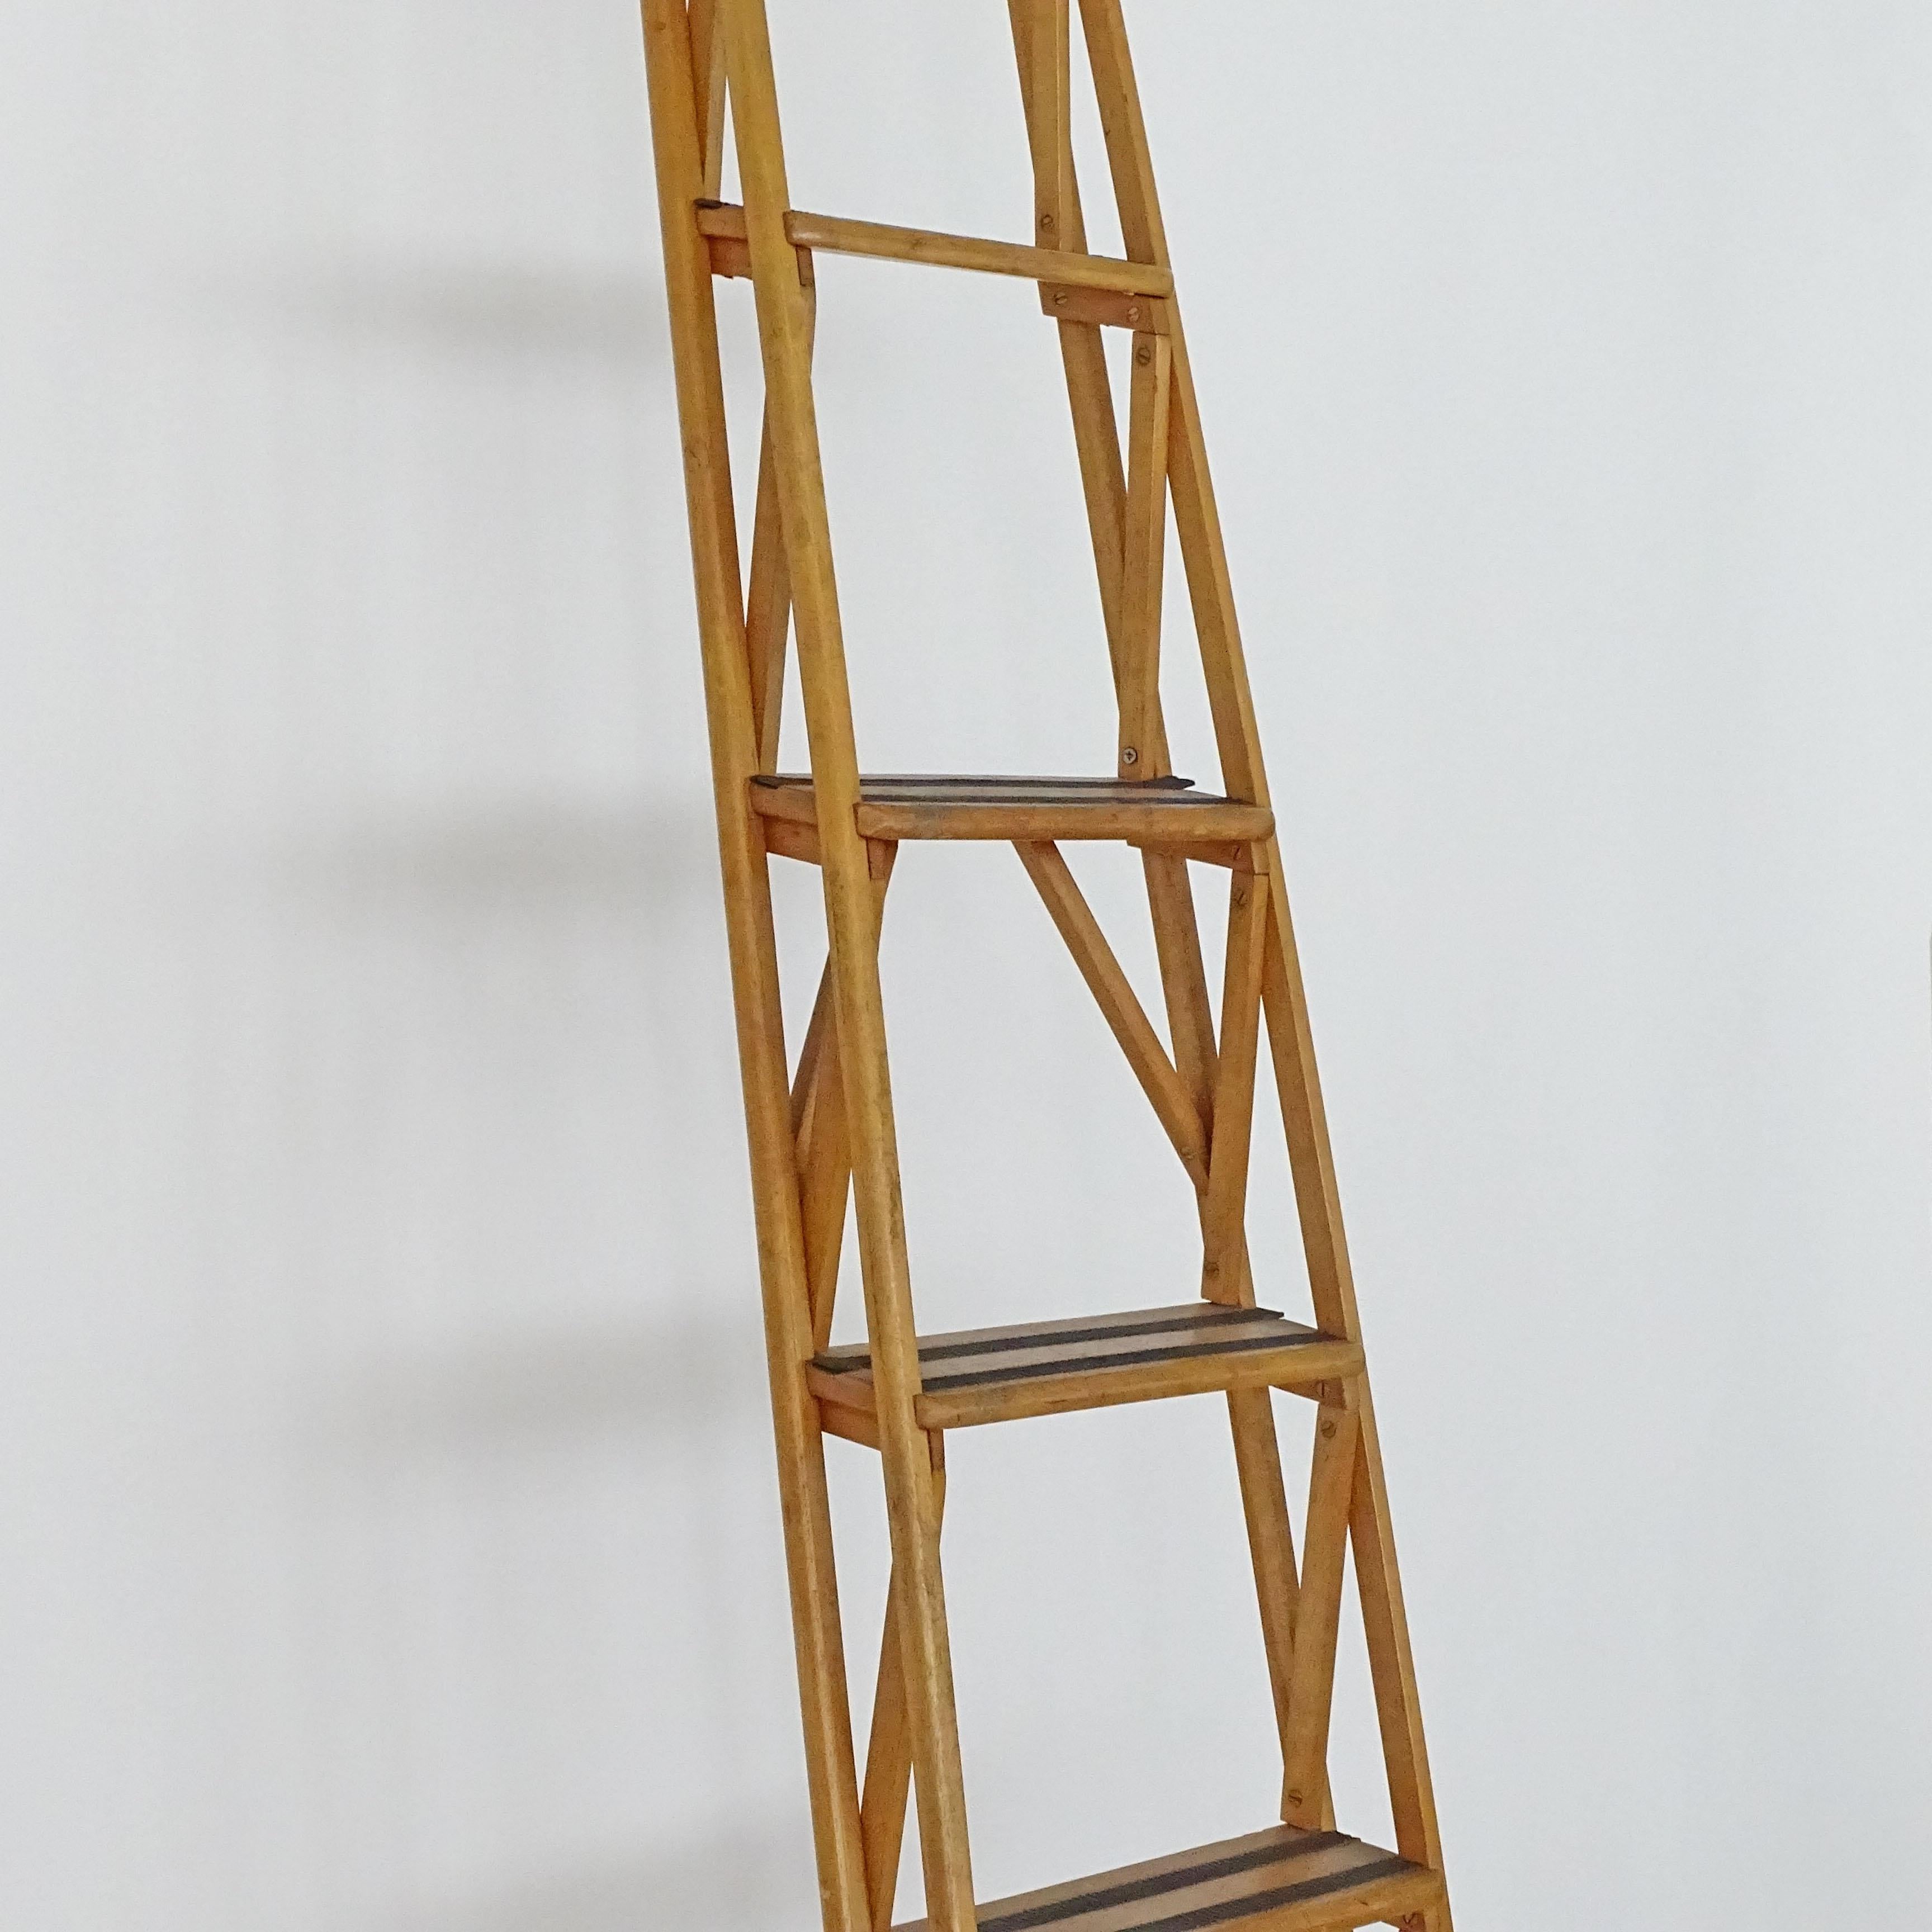 Mid-20th Century Italian Architectural Library Ladder Attributed to Franco Albini, 1950s For Sale